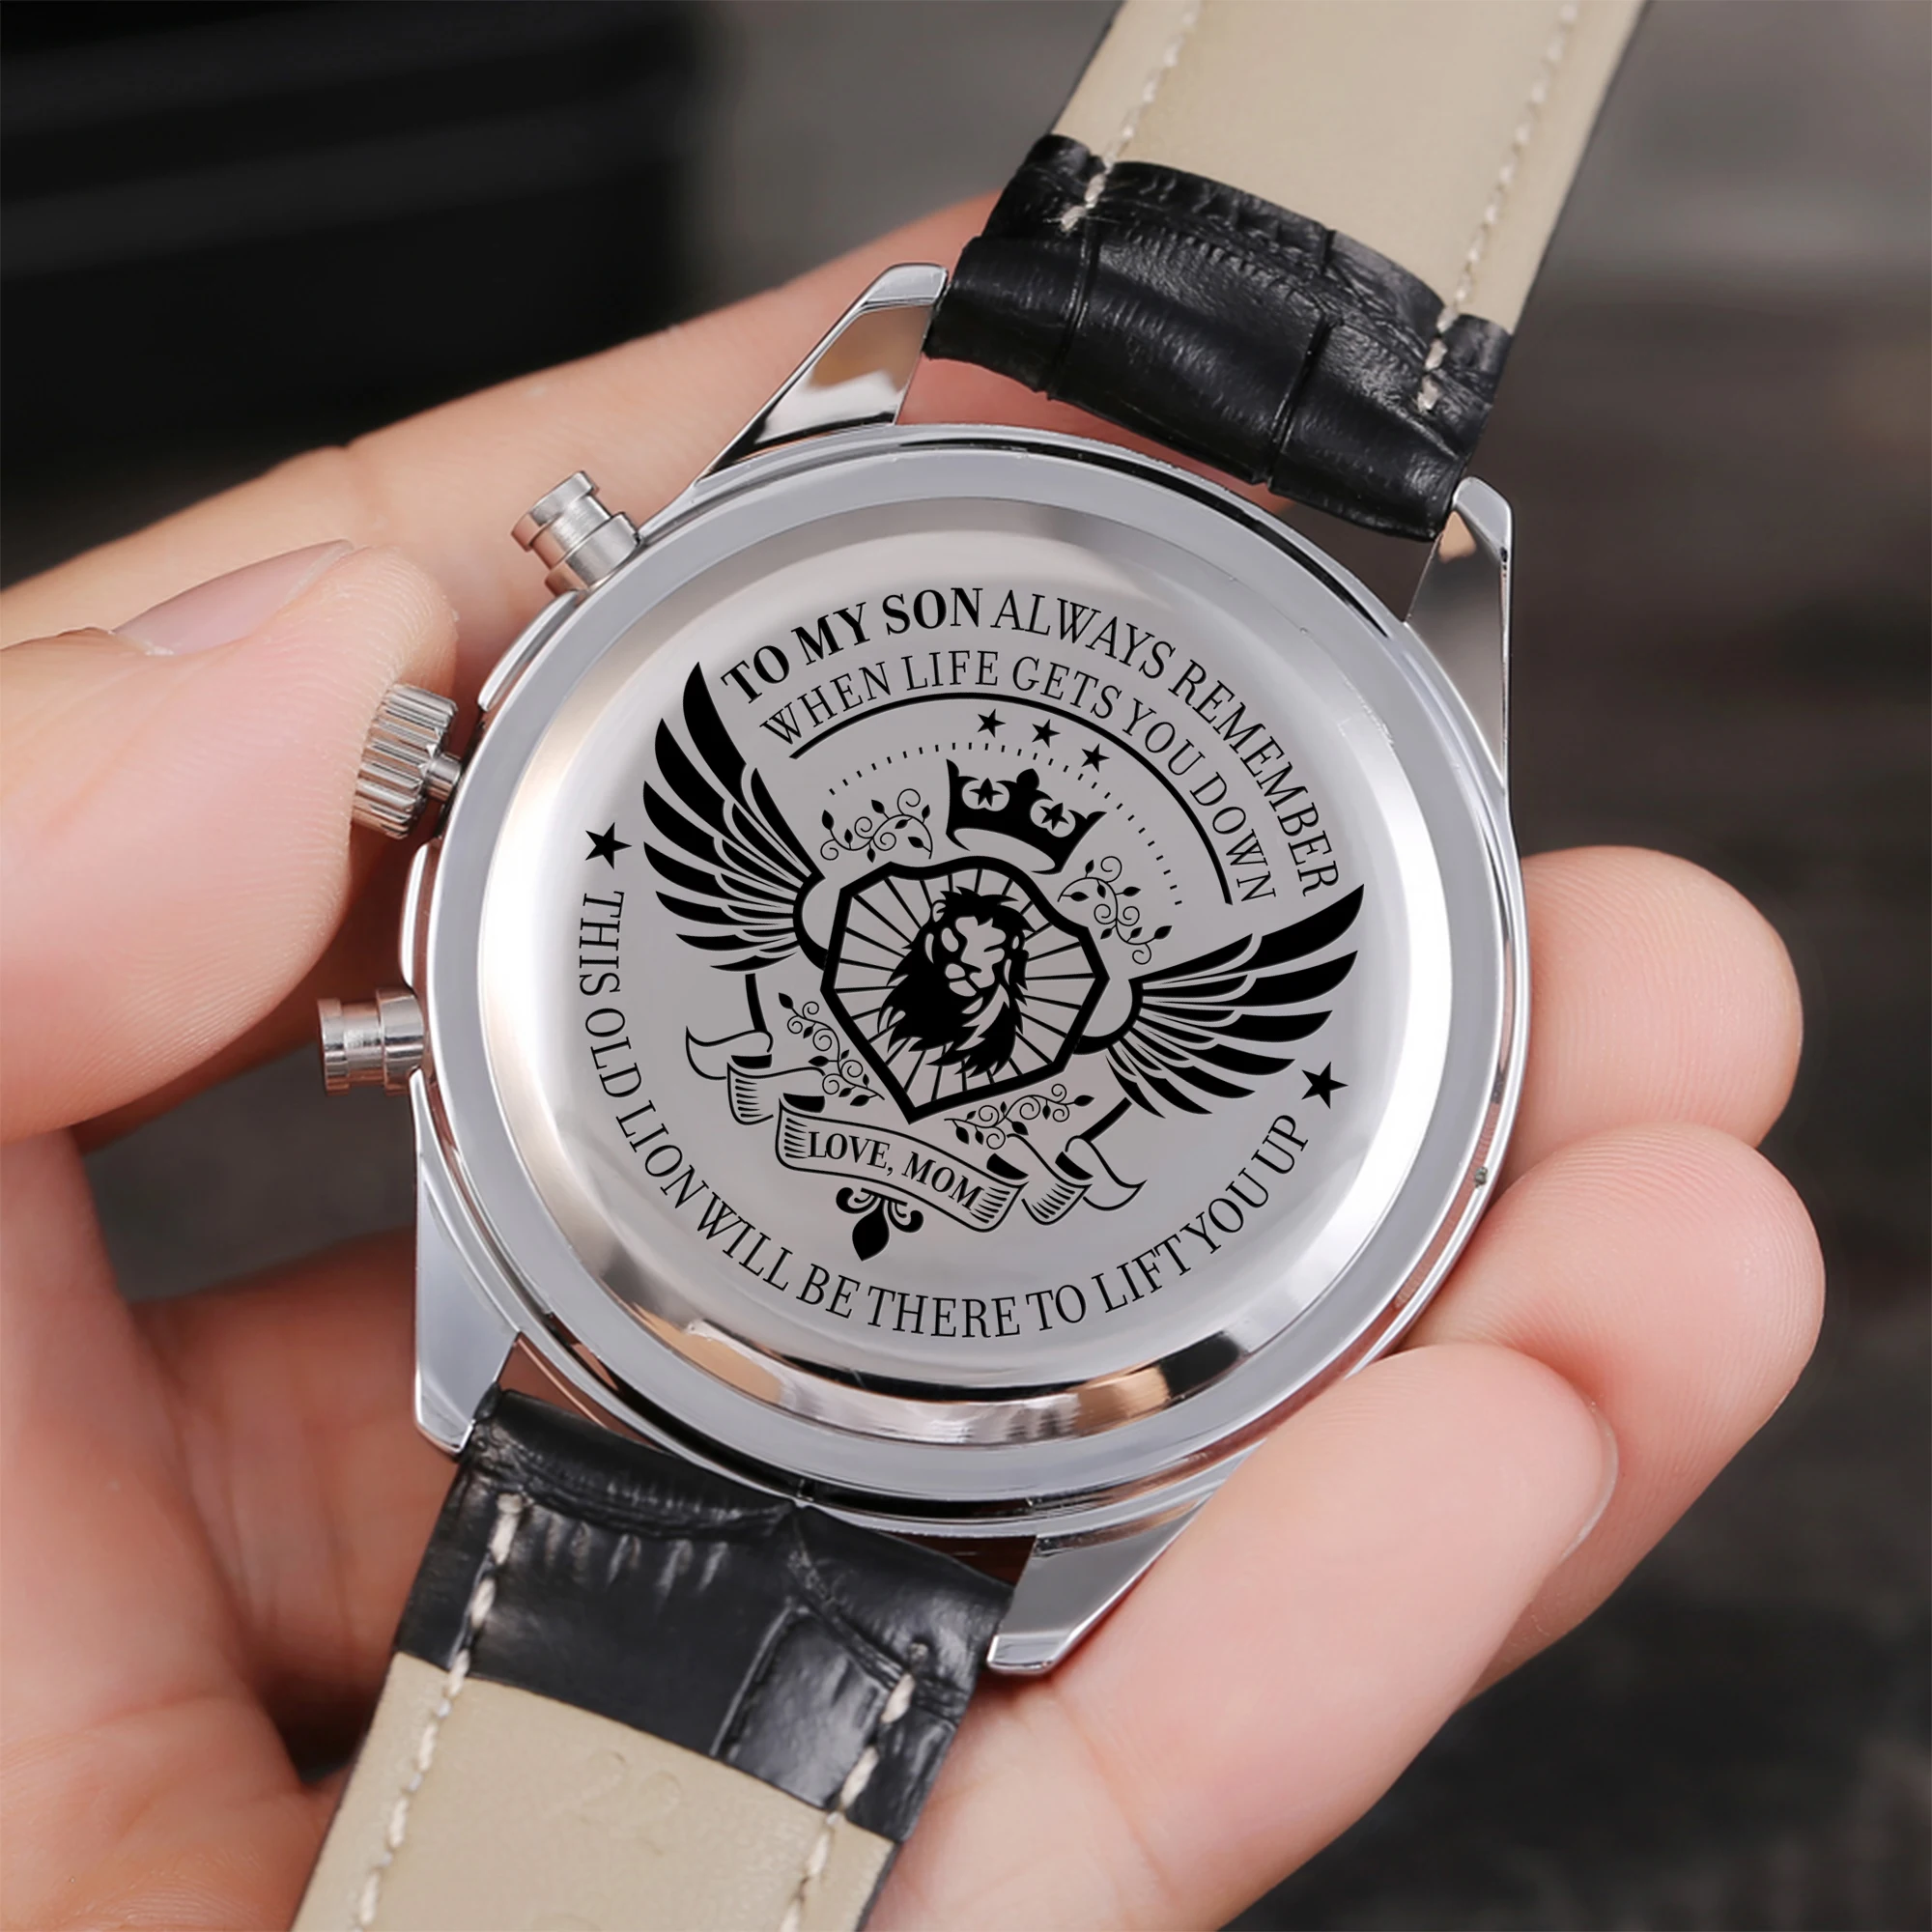 

"From Dad And Mom To Son Engraved Watch Luxury Watches -I Know You Can Be Luxury sports belt waterproof watch "